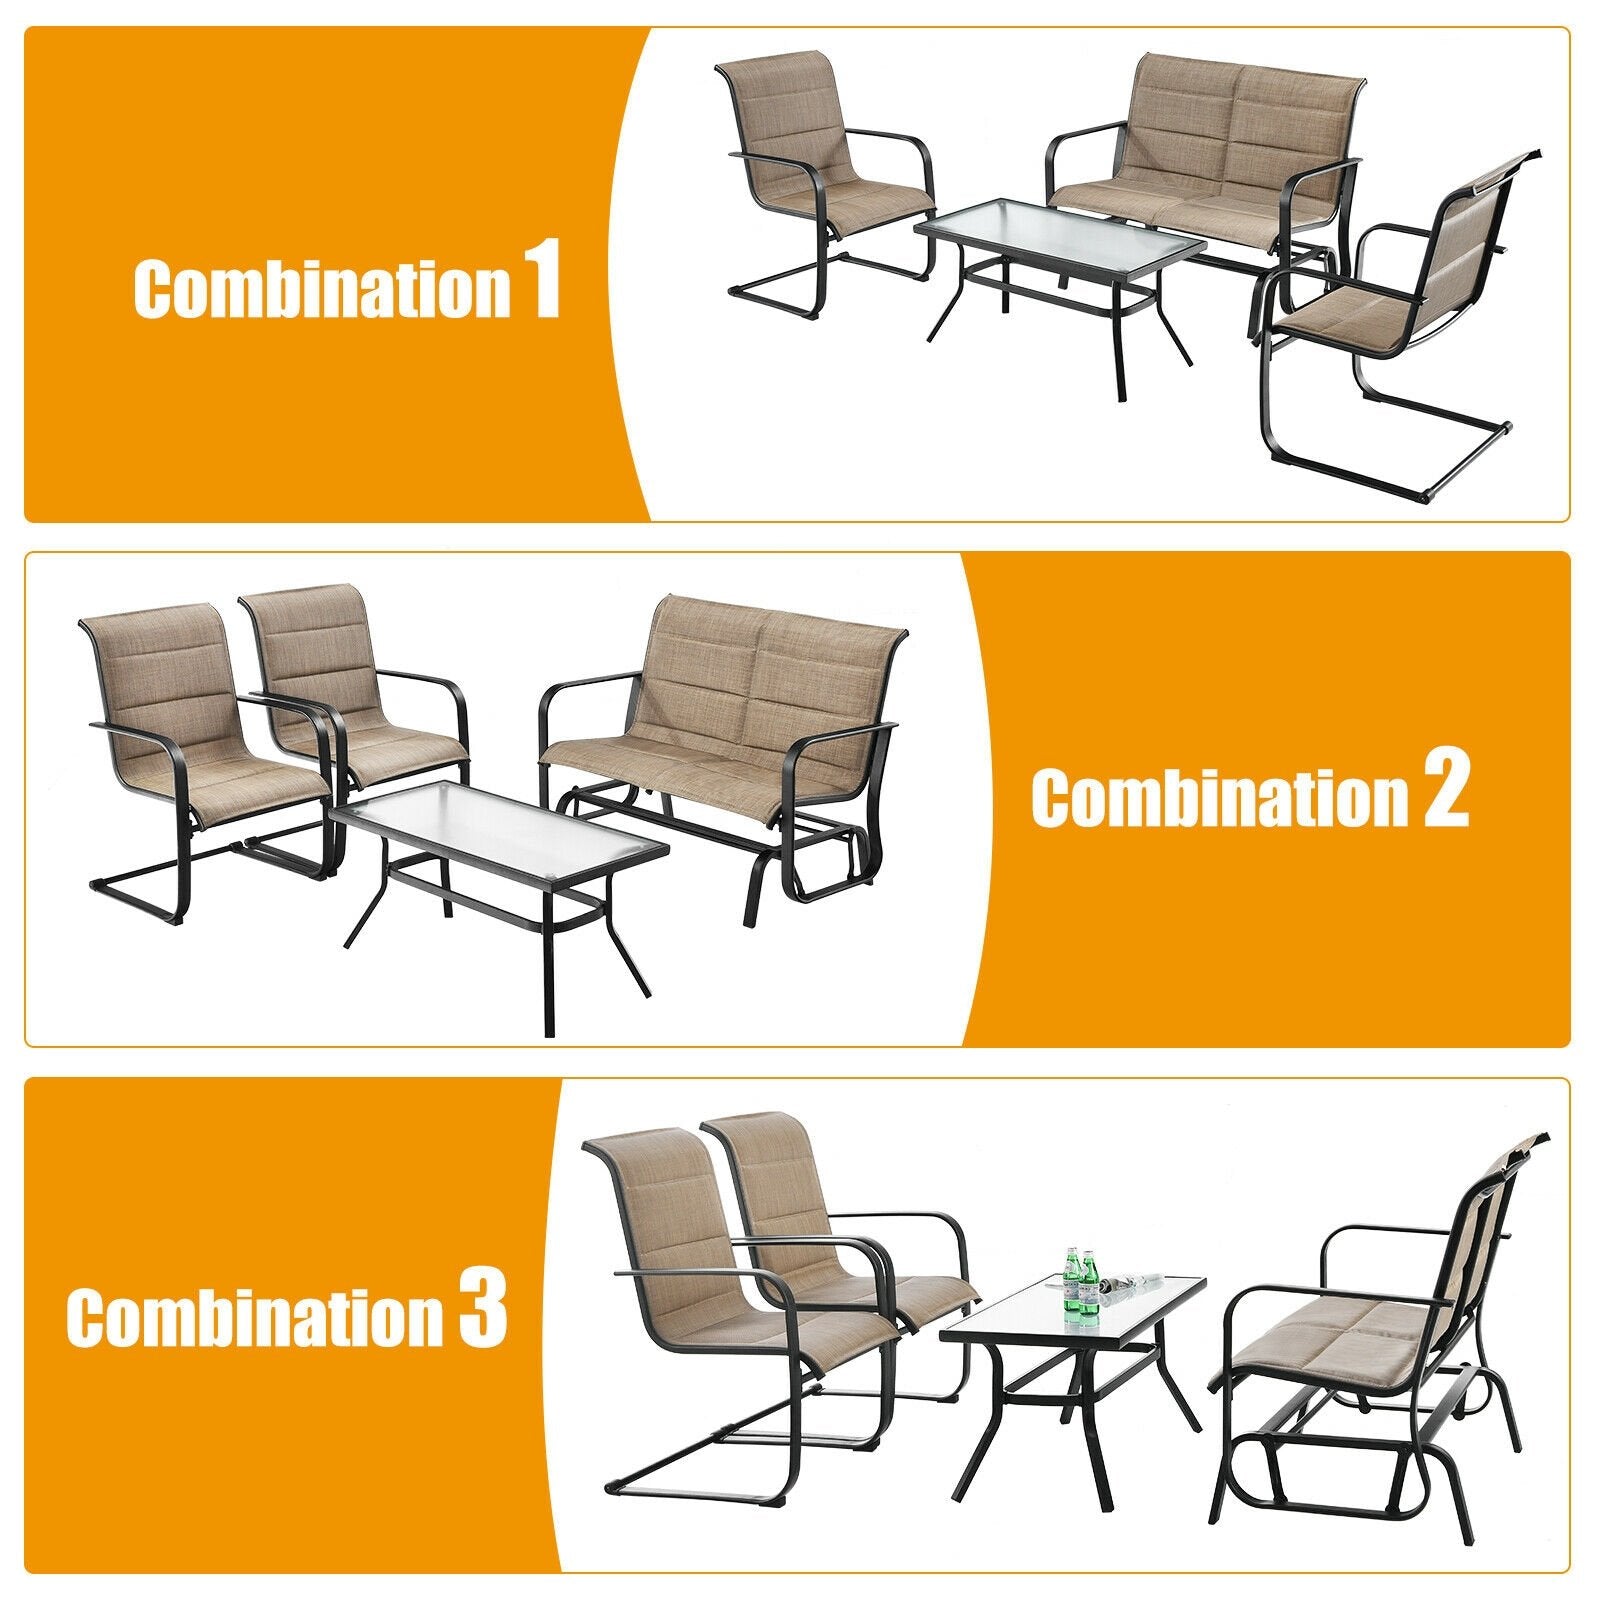 4 Pieces Outdoor Patio Furniture Set with Padded Glider Loveseat and Coffee Table, Brown at Gallery Canada